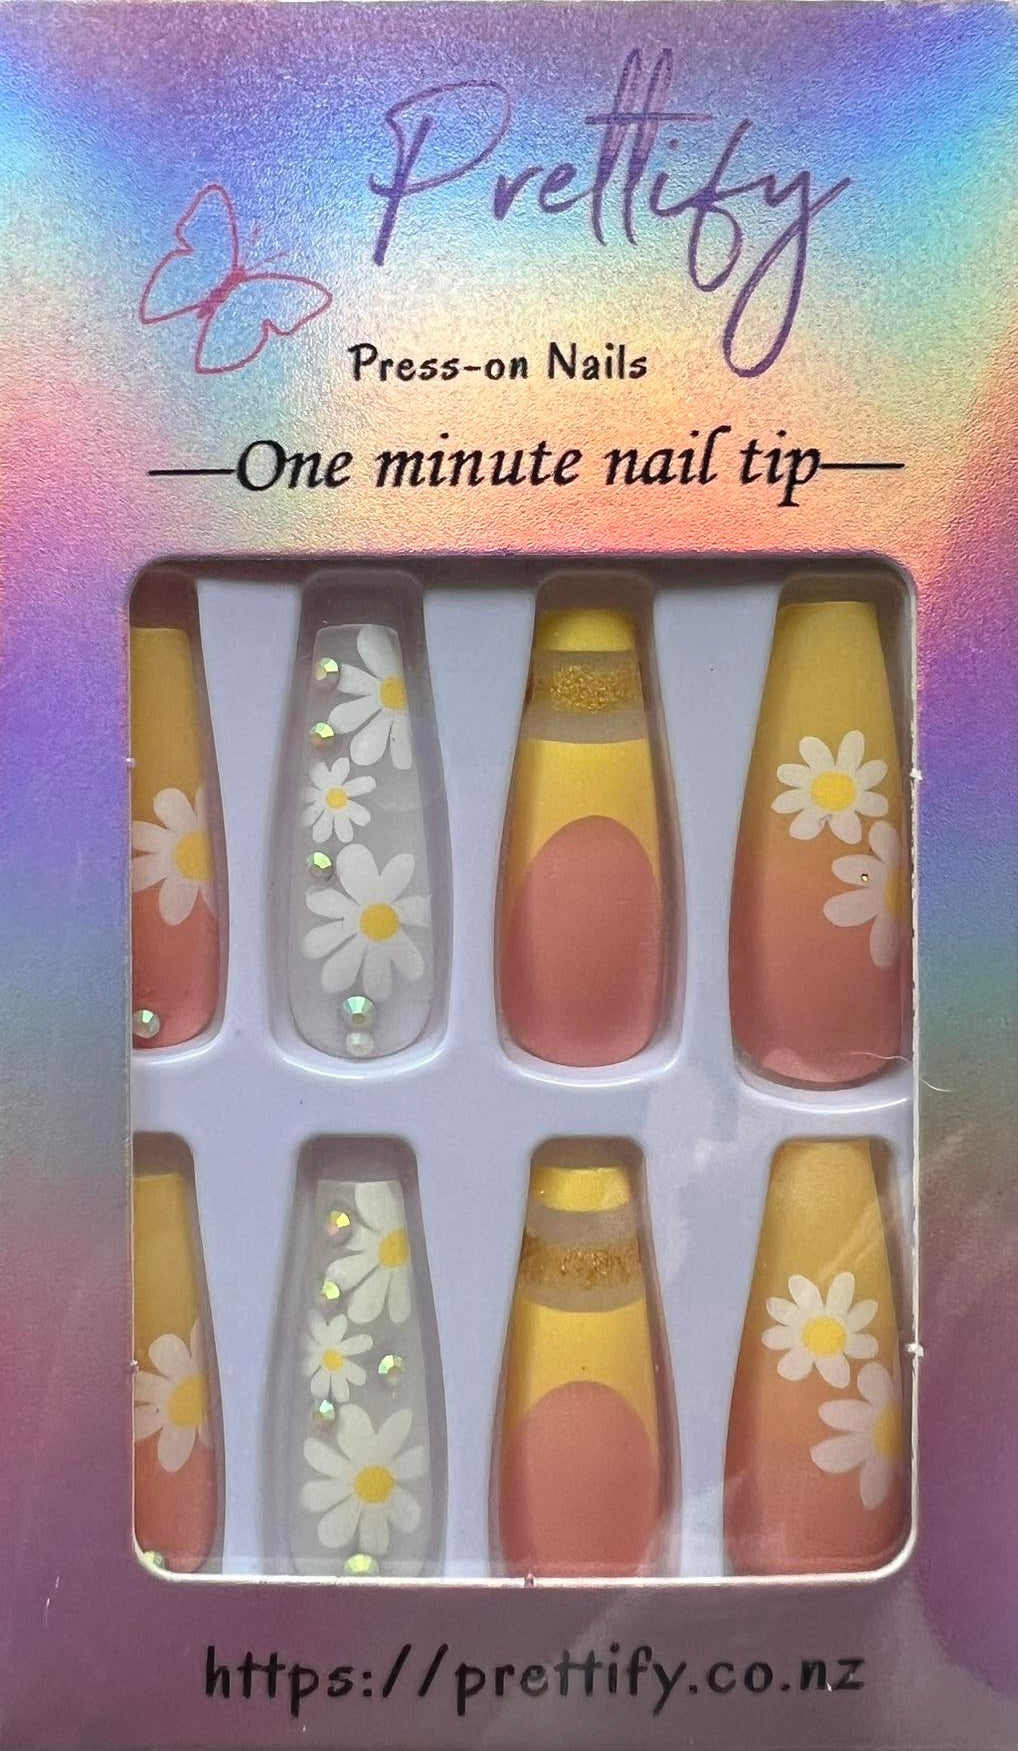 Long Coffin Press on Nails. Yellow & Clear with Daisies. Durable Acrylic Press on Nails. Easy and quick to apply. Great for those special occasions, parties or add an edge to any outfit. Gorgeous, flattering and you can re-use them again and again.